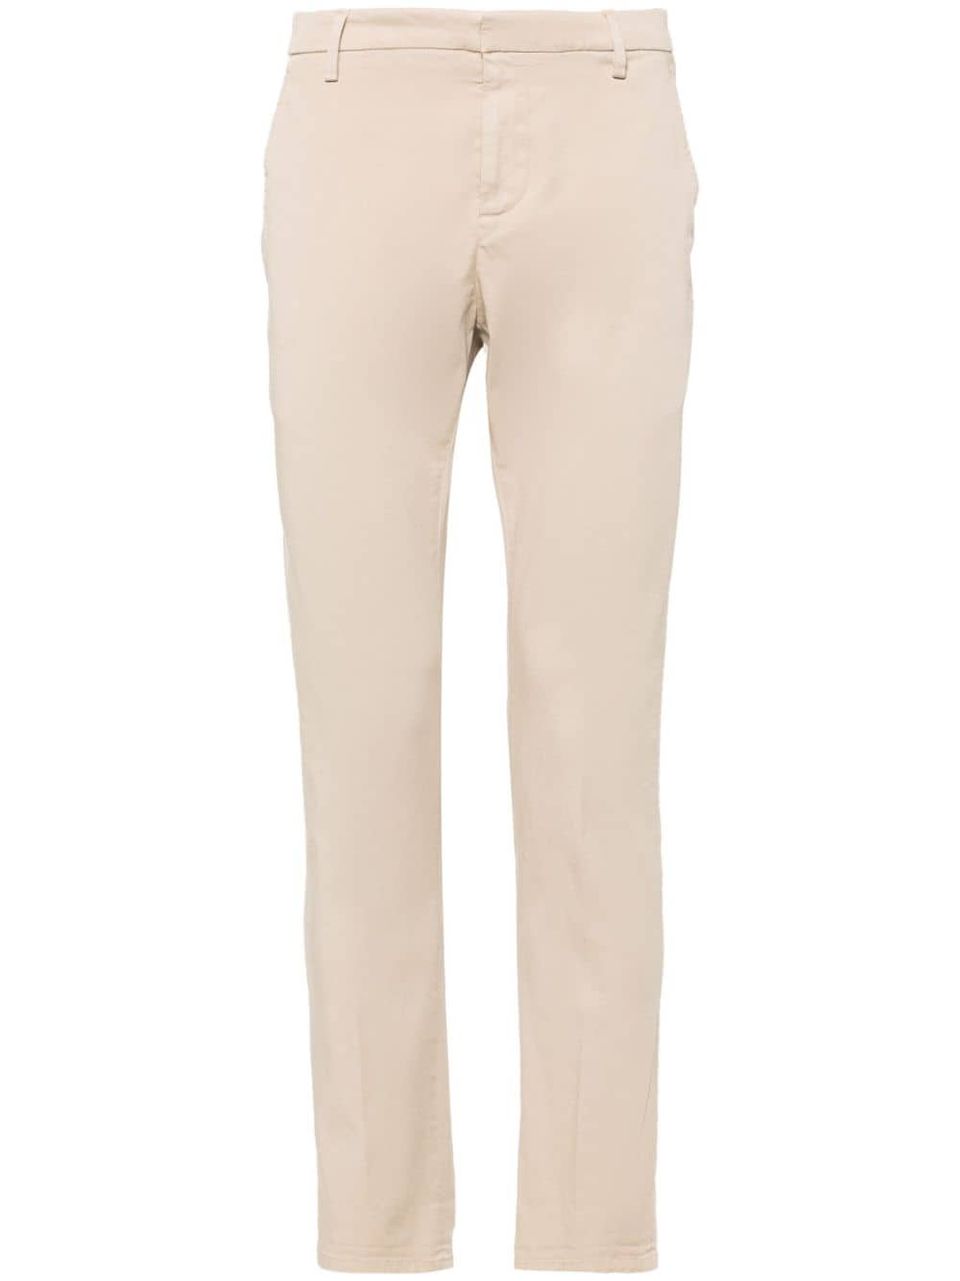 Low-waisted tapered chino pants